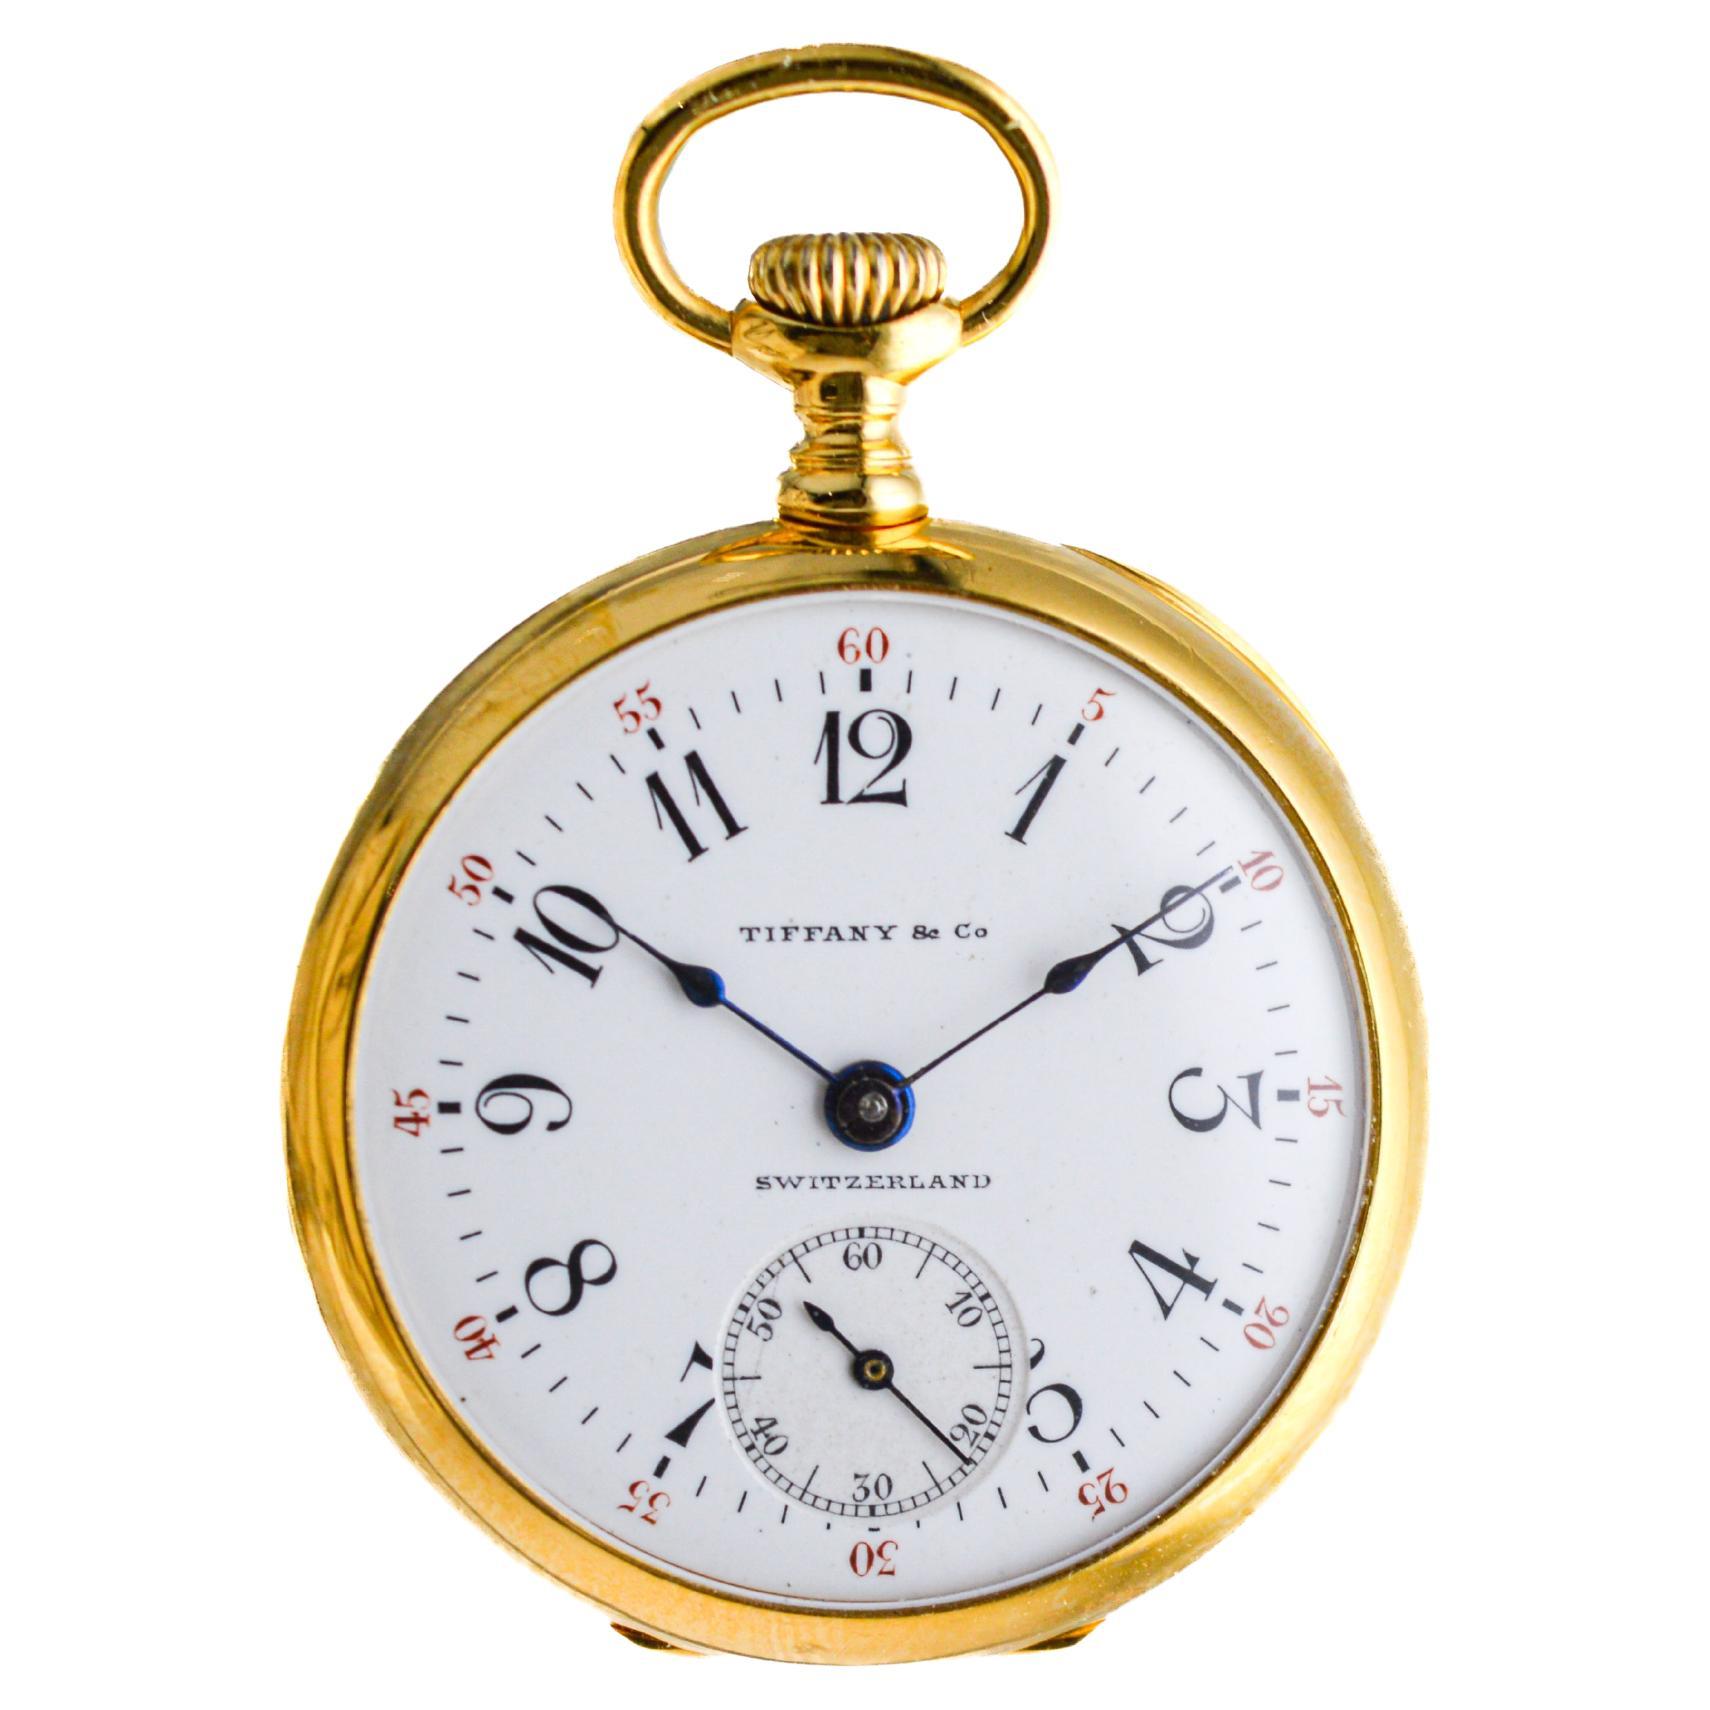 Tiffany & Co 18Kt Gold Pendant Watch with Gold Chain from 1912 Enamel Dial In Excellent Condition For Sale In Long Beach, CA